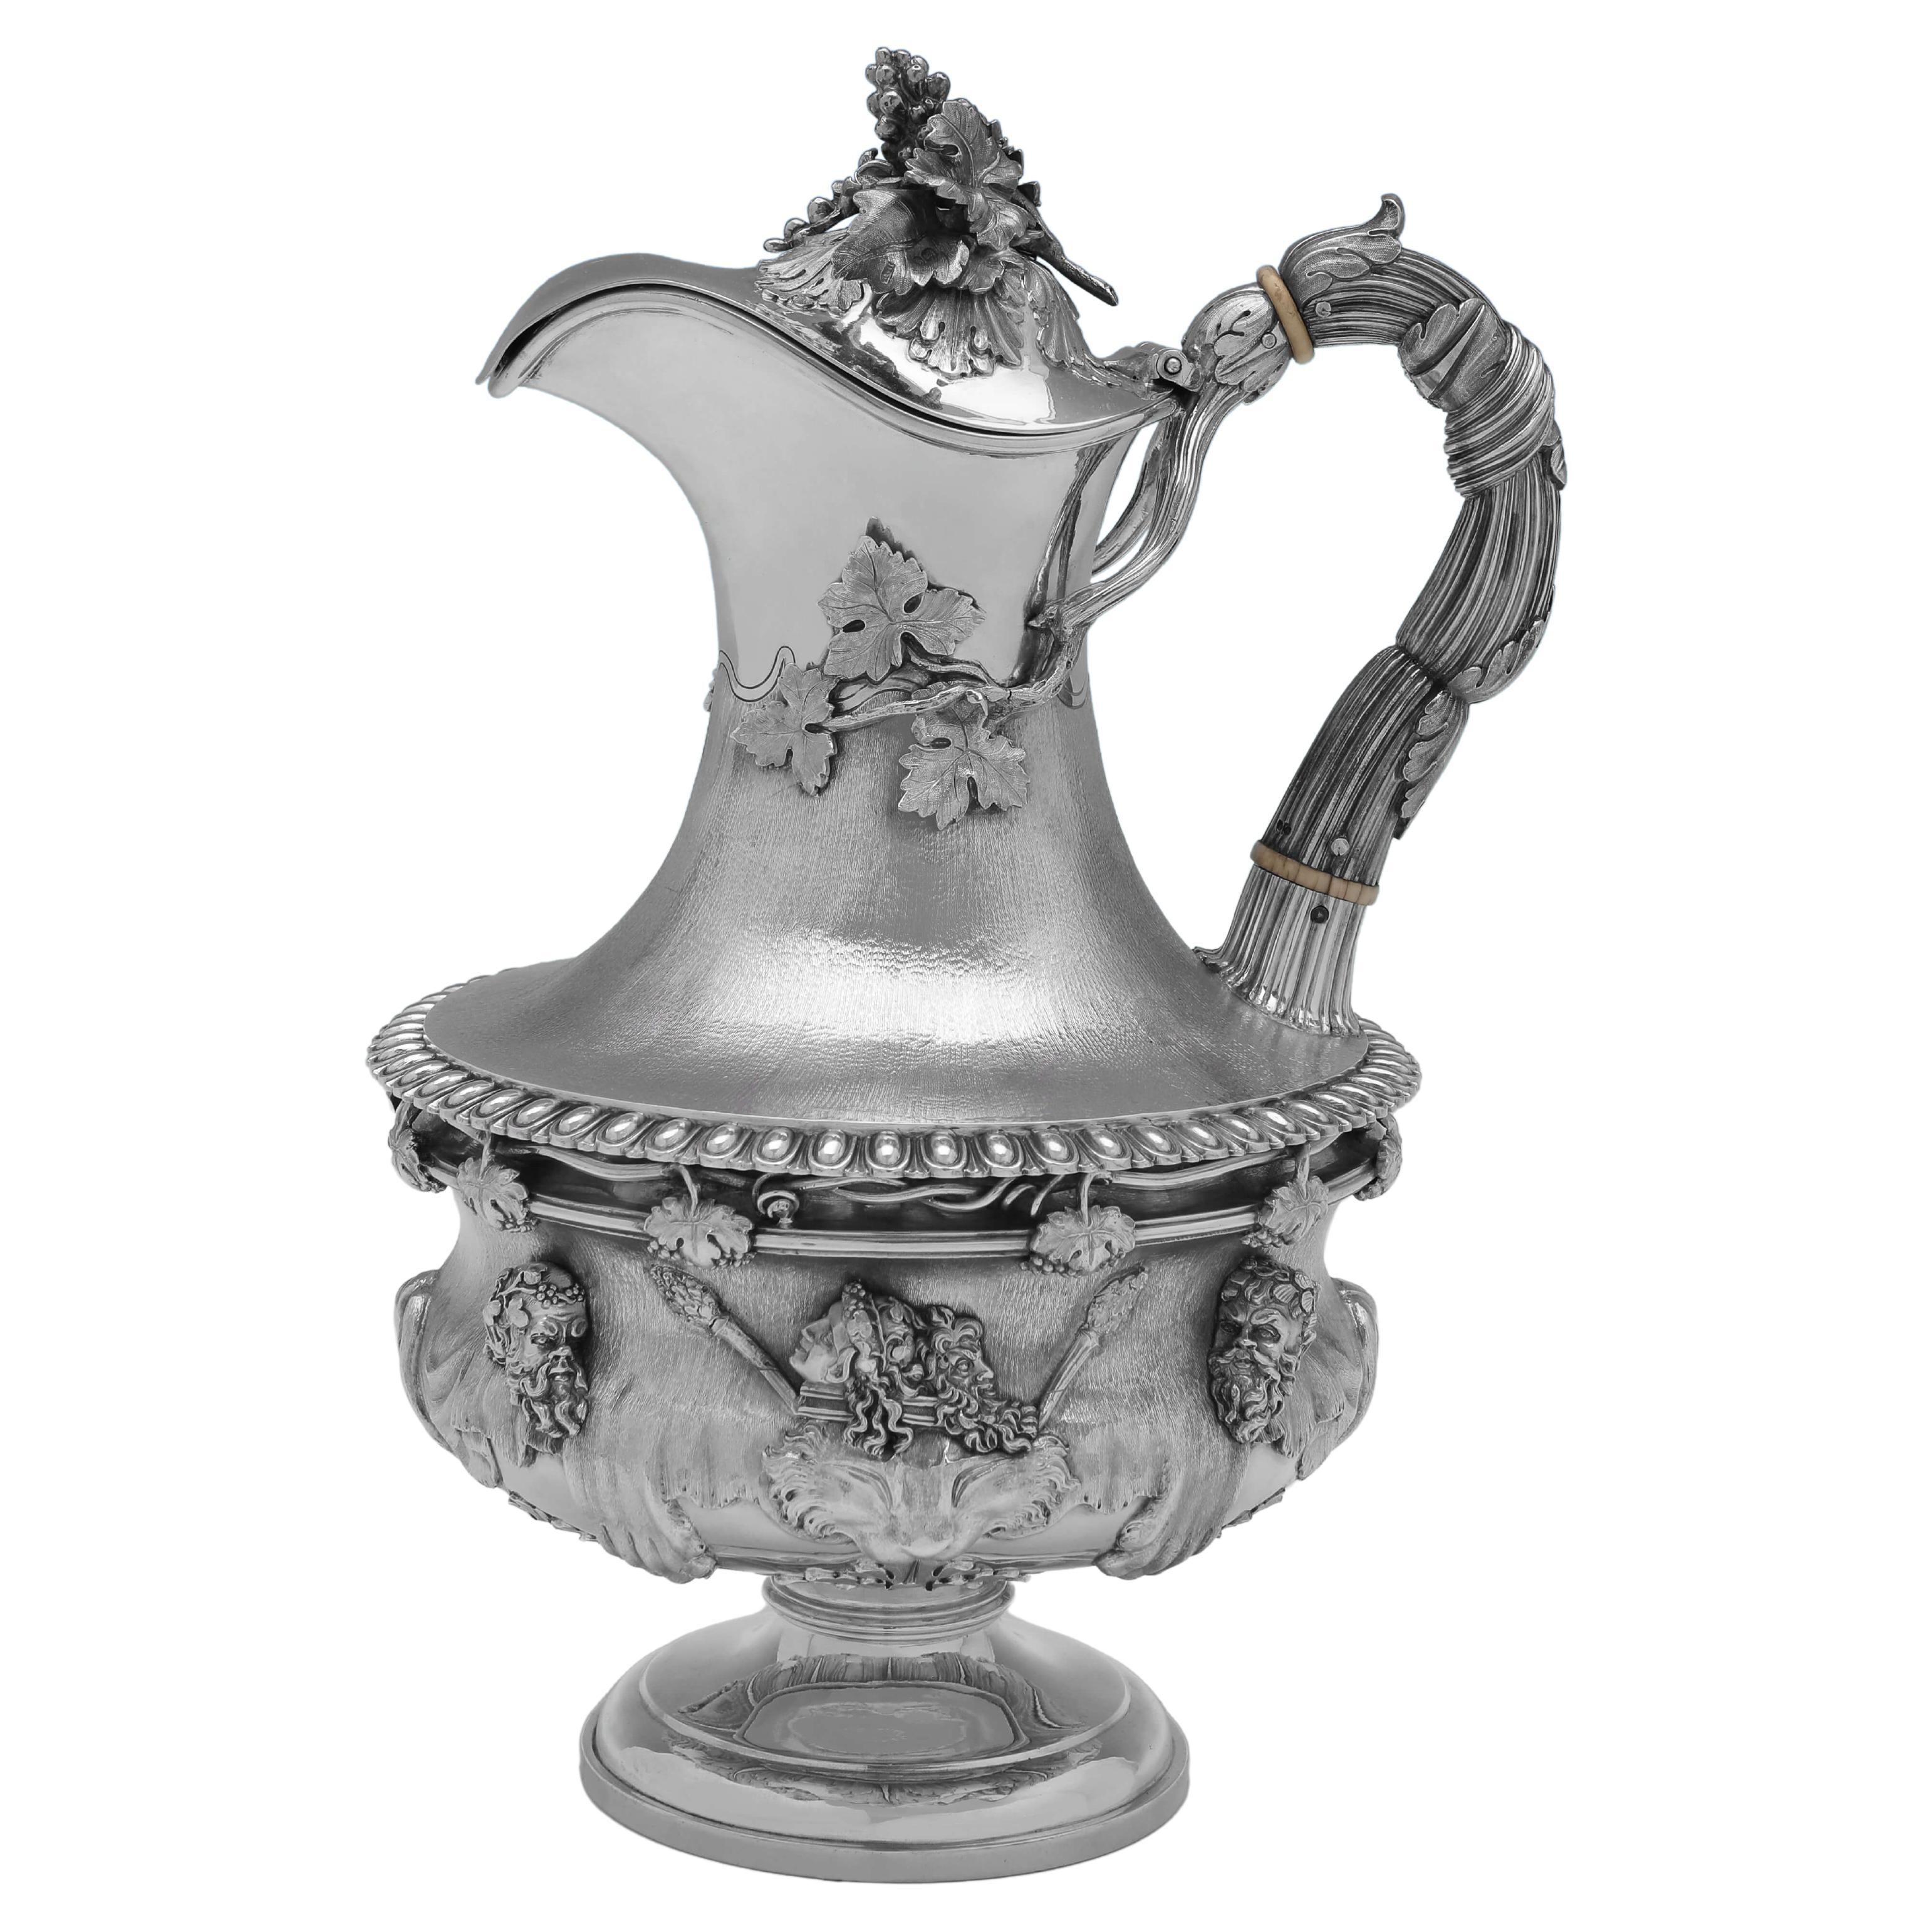 A Warwick Jug - A rare Victorian sterling silver example - London 1853 R Hennell For Sale